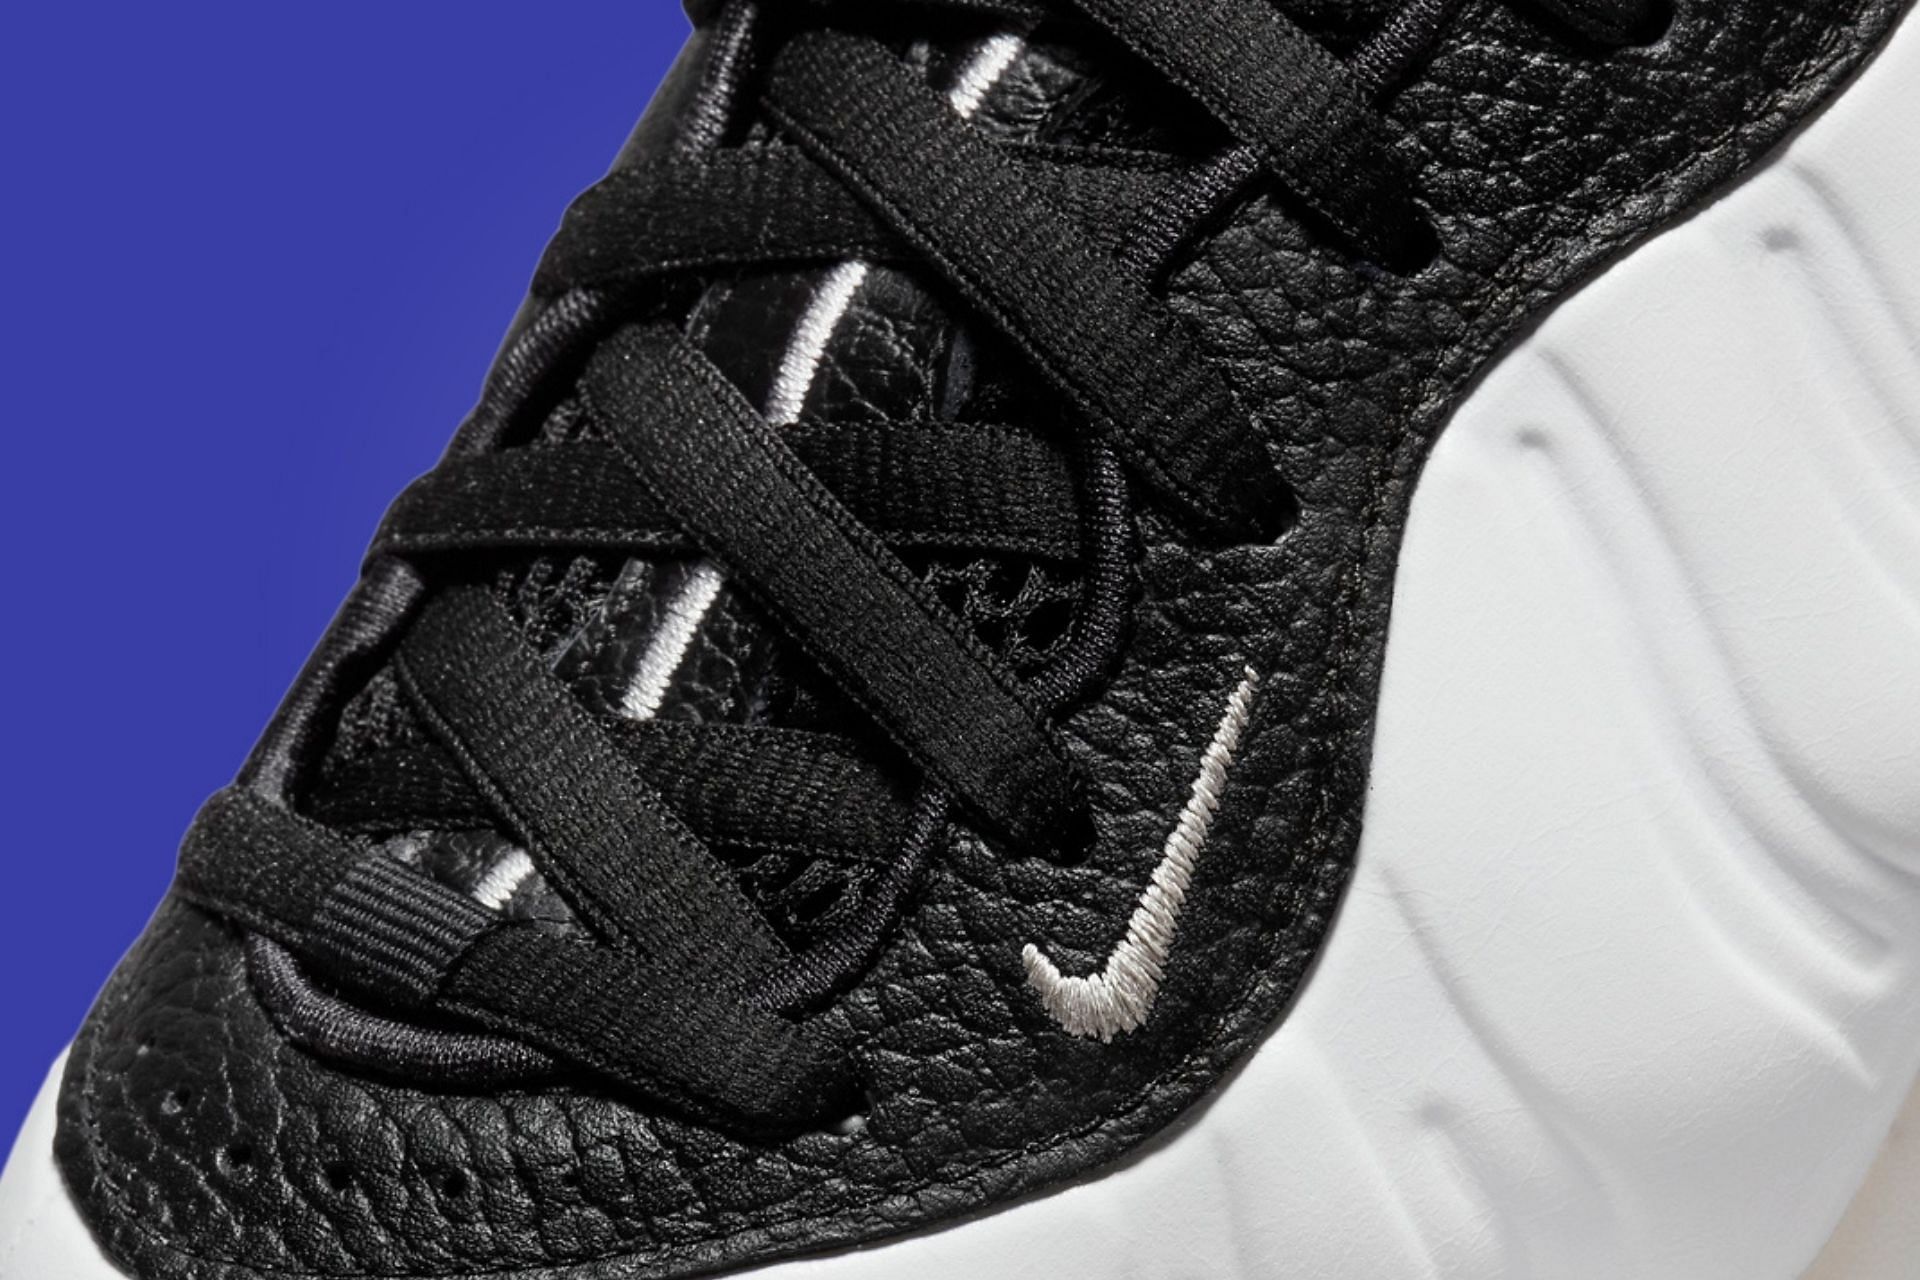 Take a closer look at the toe tops and tongue areas of the shoe (Image via Nike)